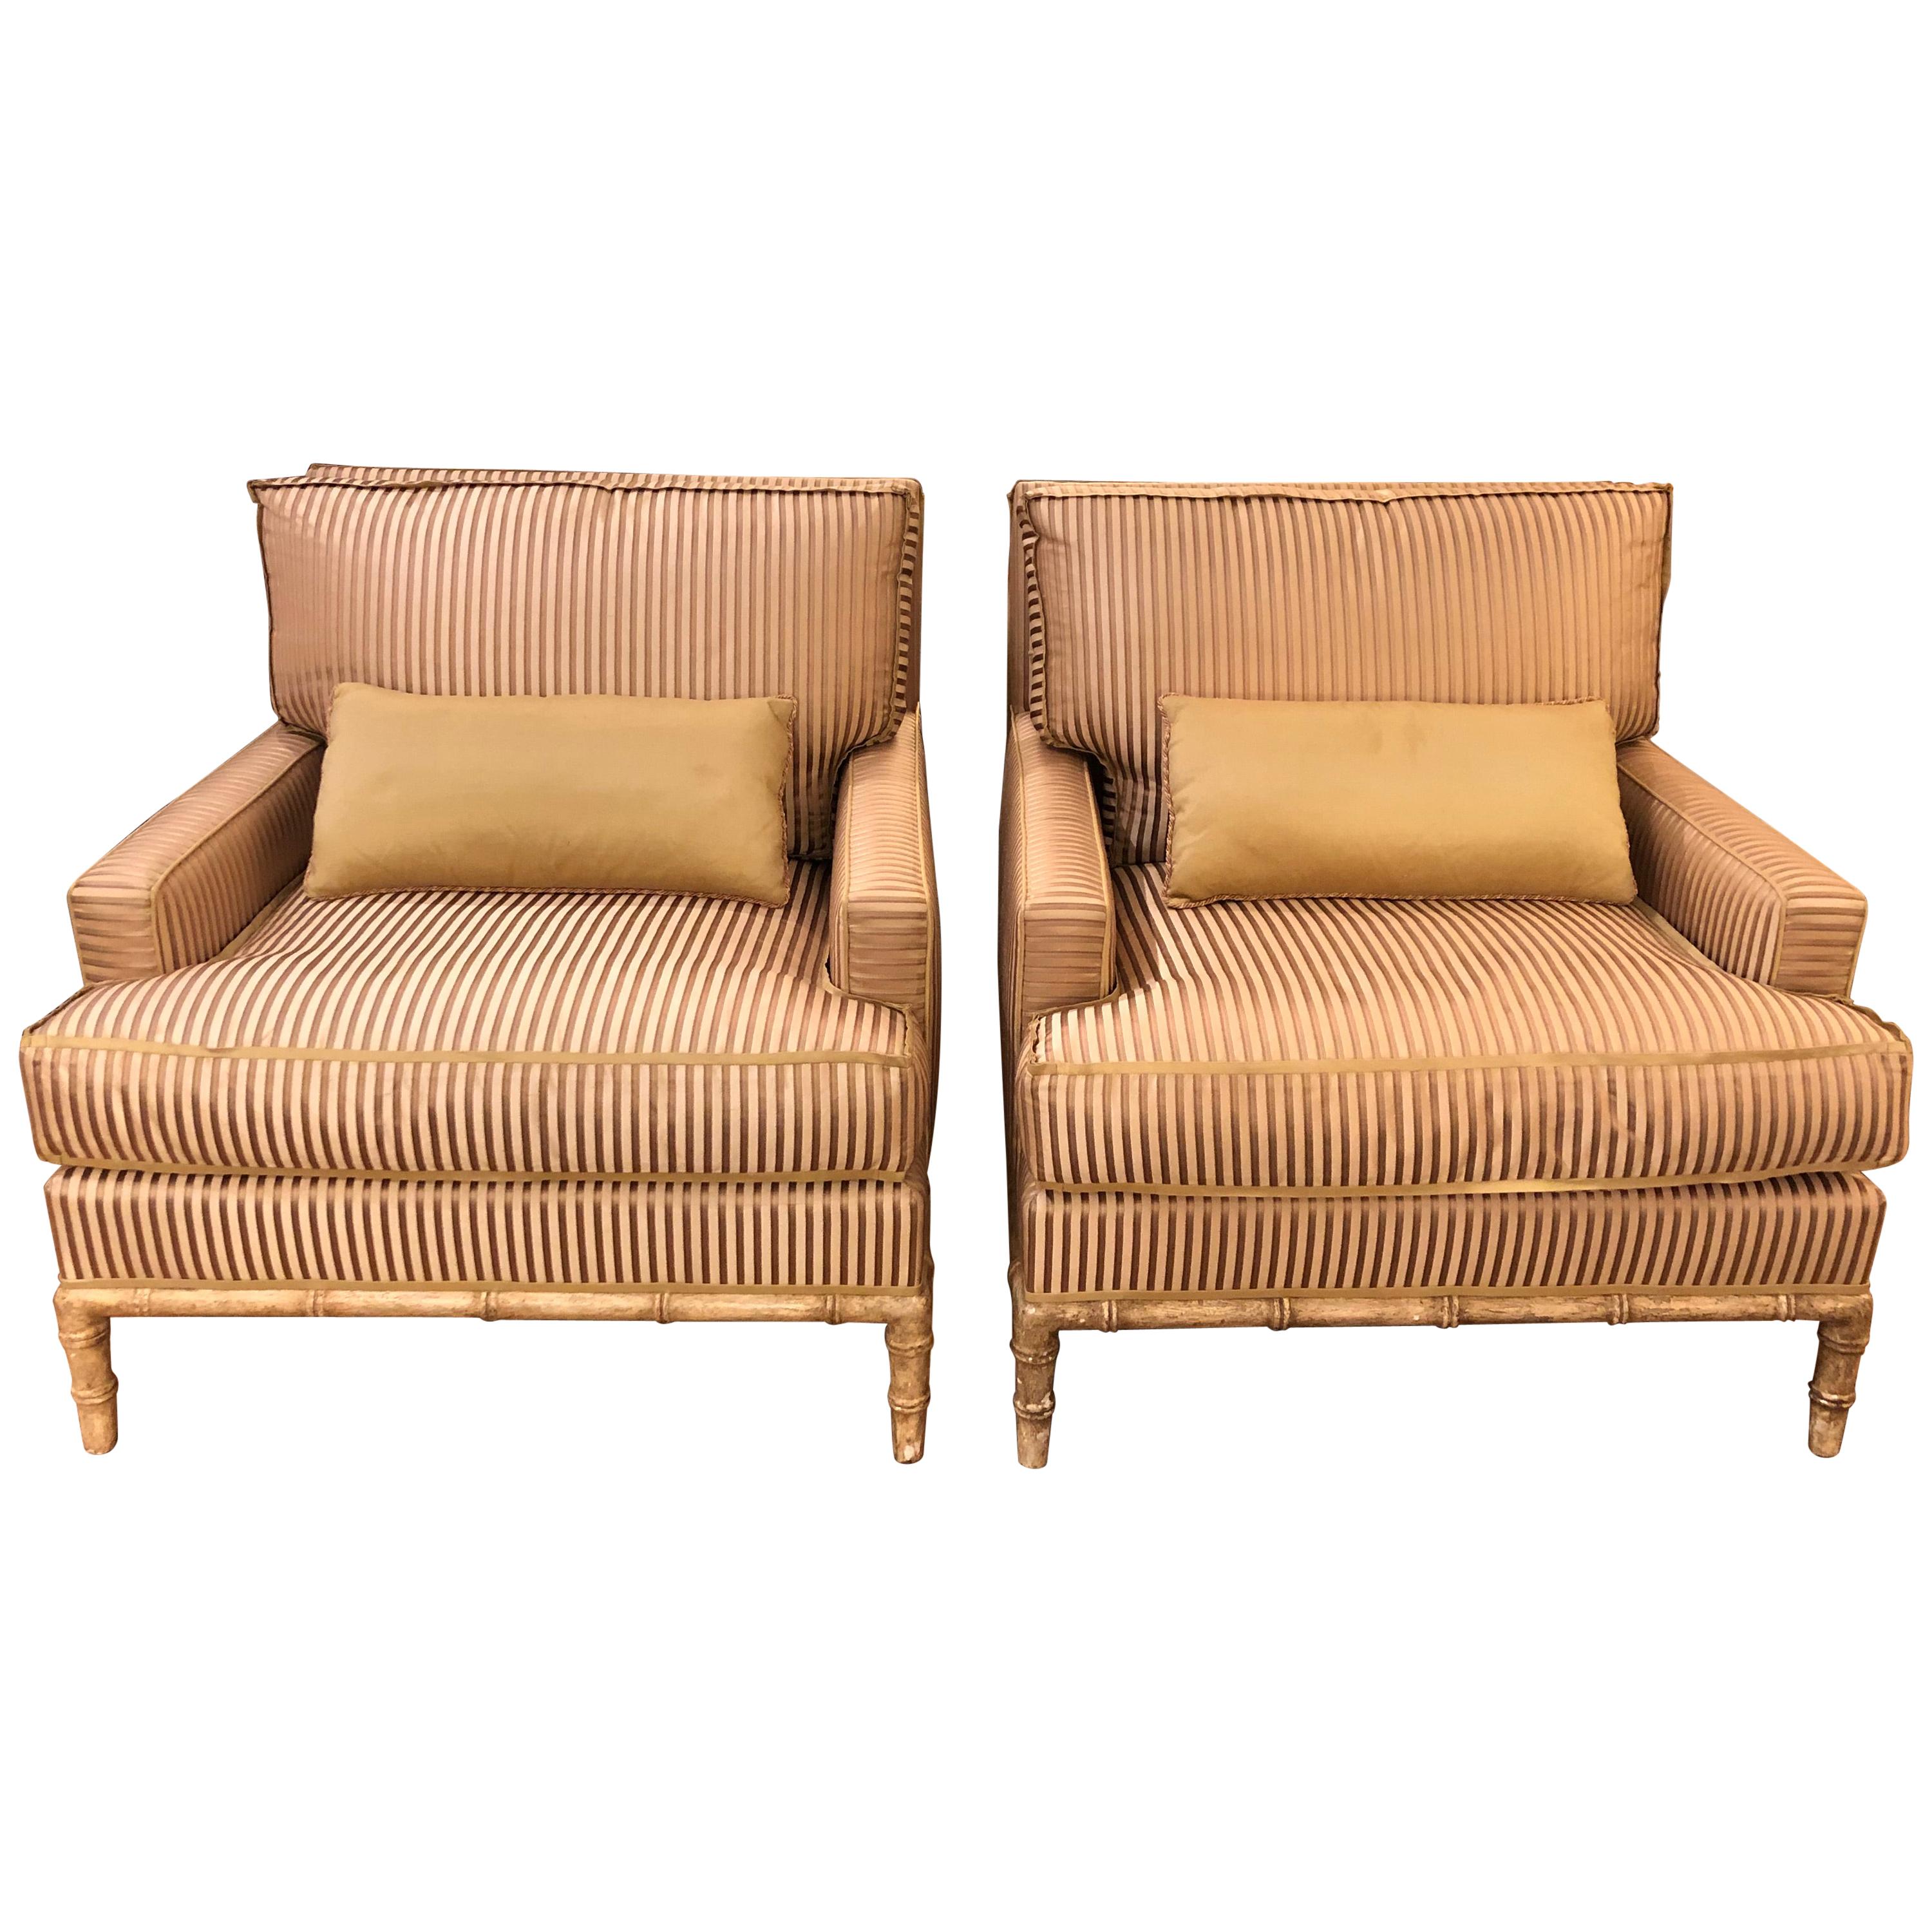 Sinfully Luxurious Pair of Bamboo and Silk Velvet Upholstered Club Chairs